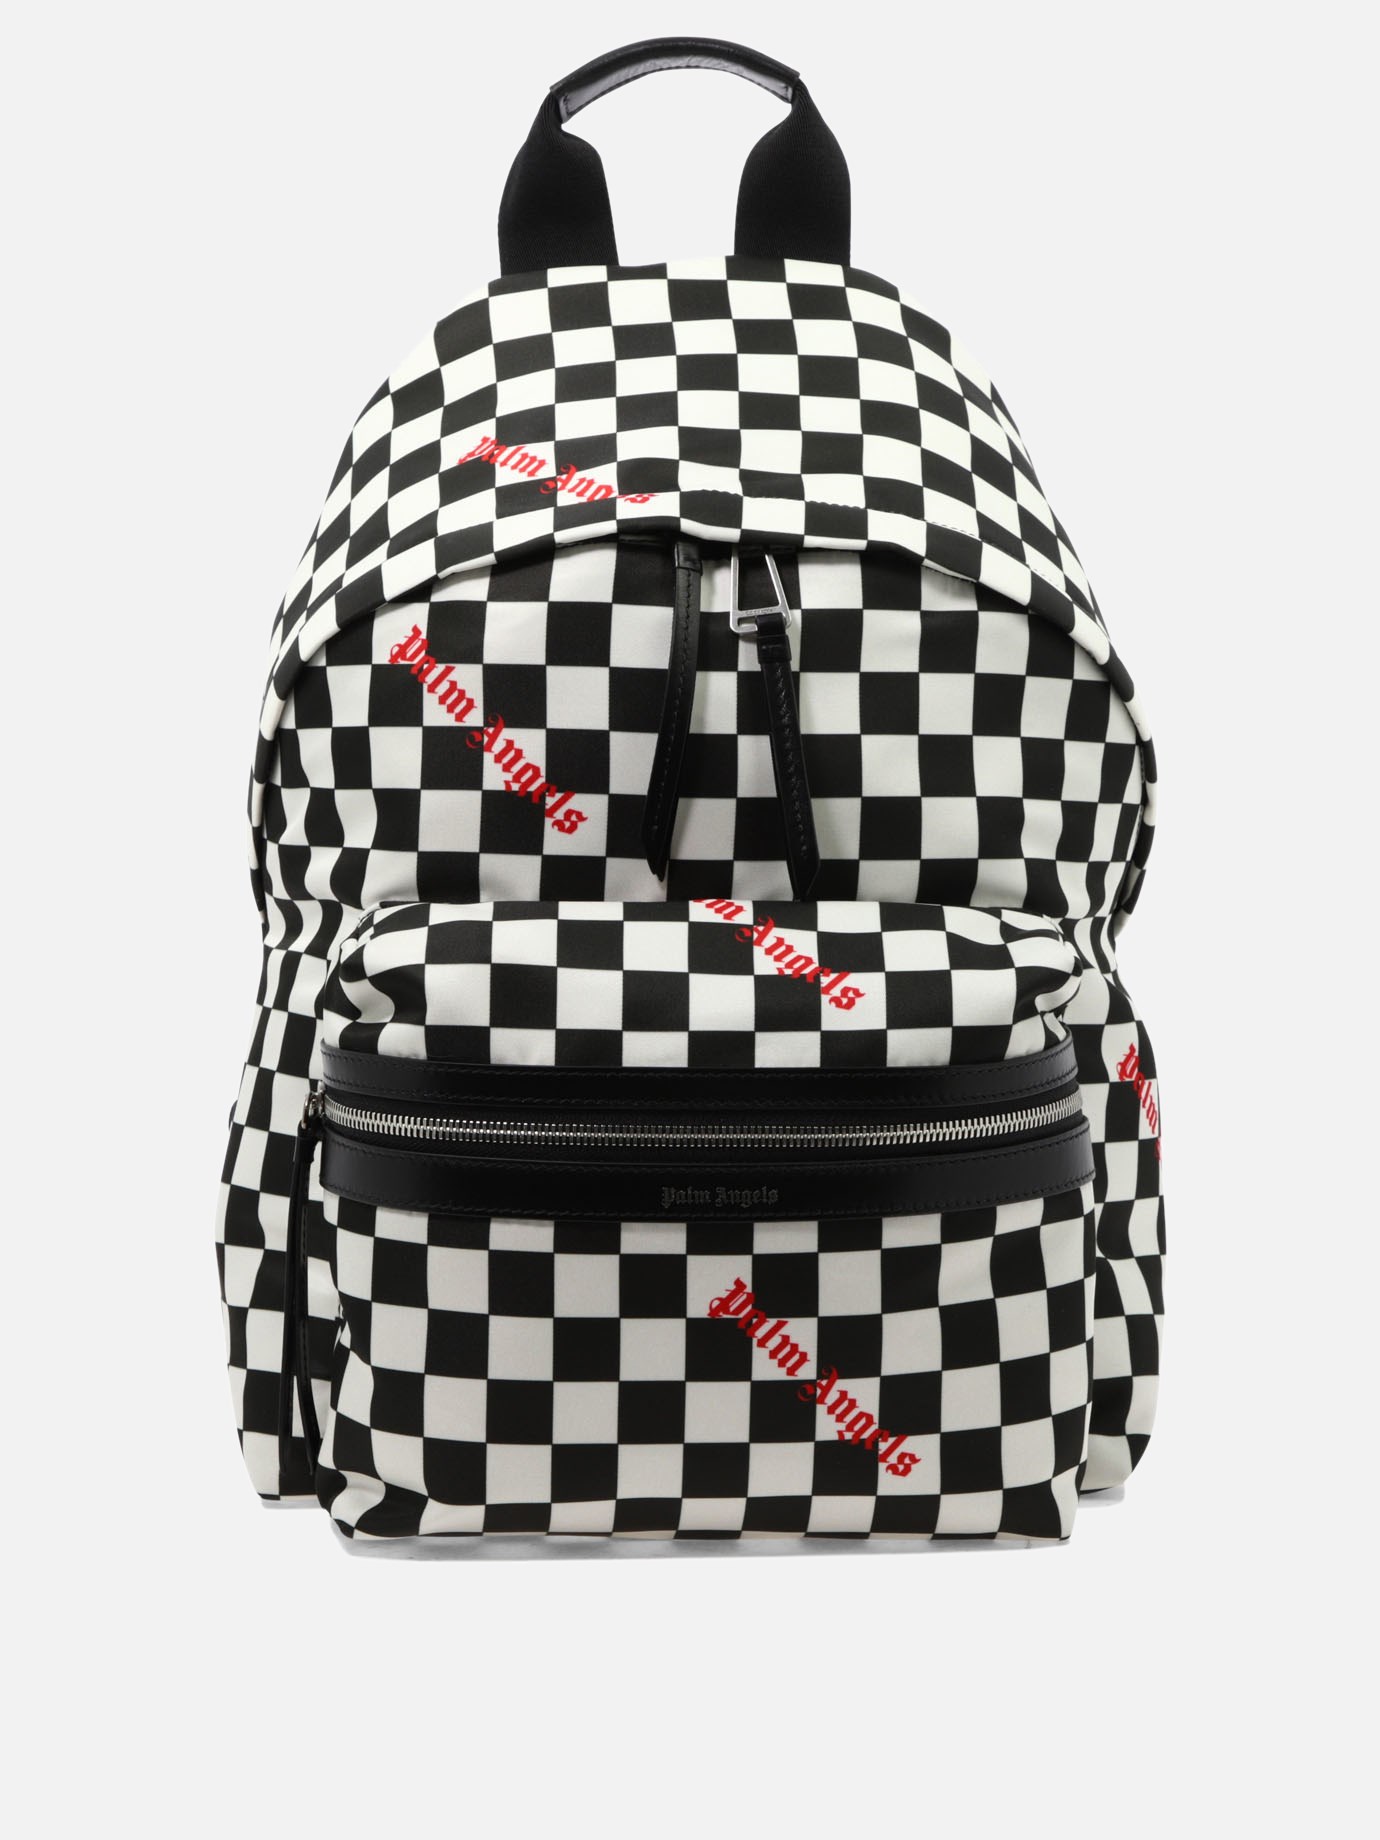  Printed Damier  backpackby Palm Angels - 3